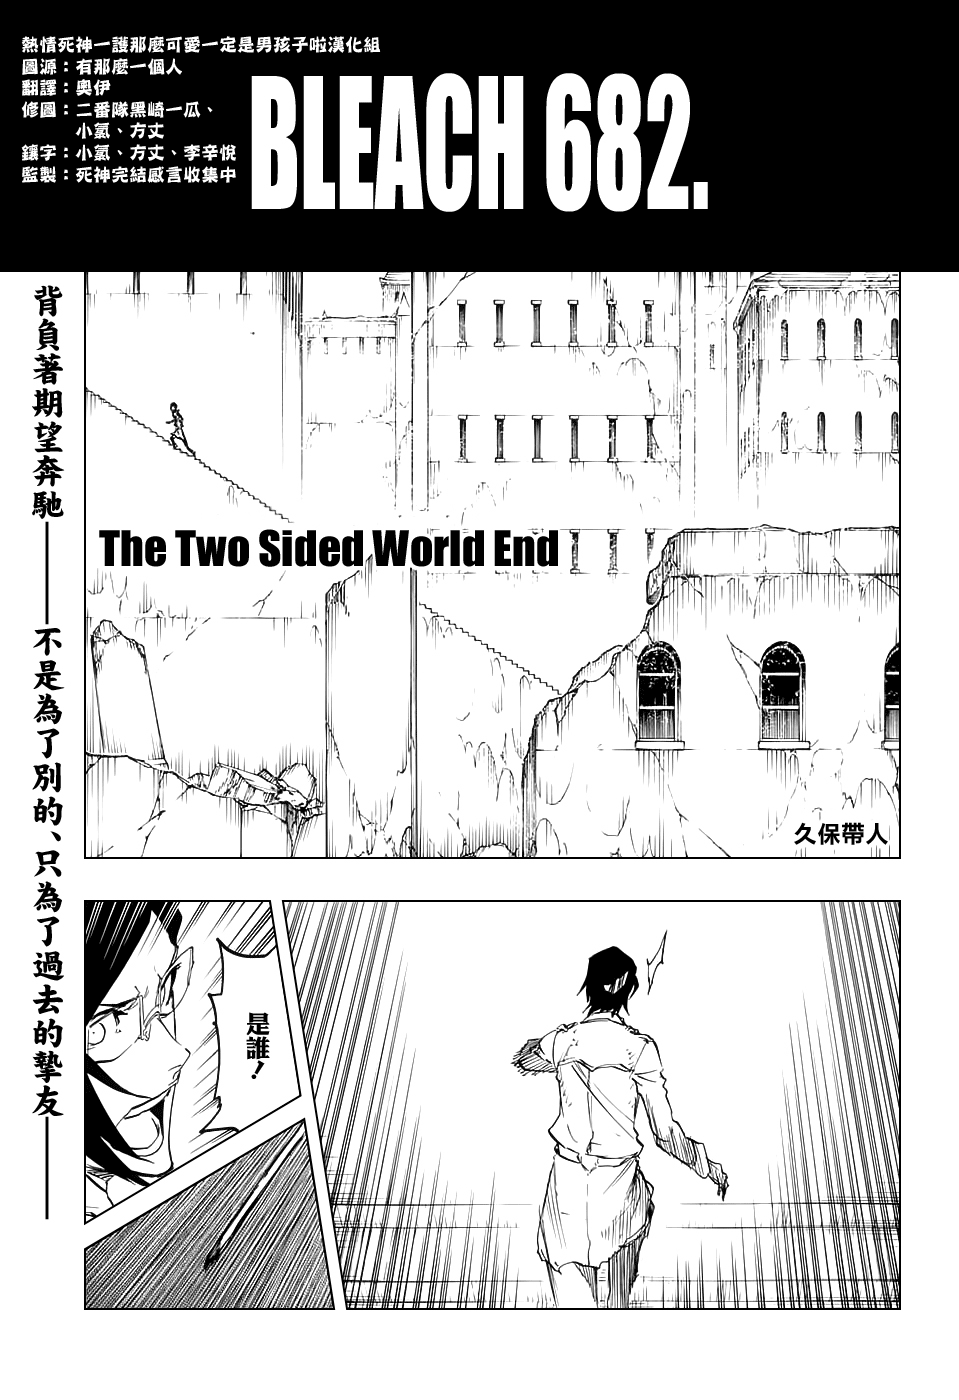 682The Two Sided World End